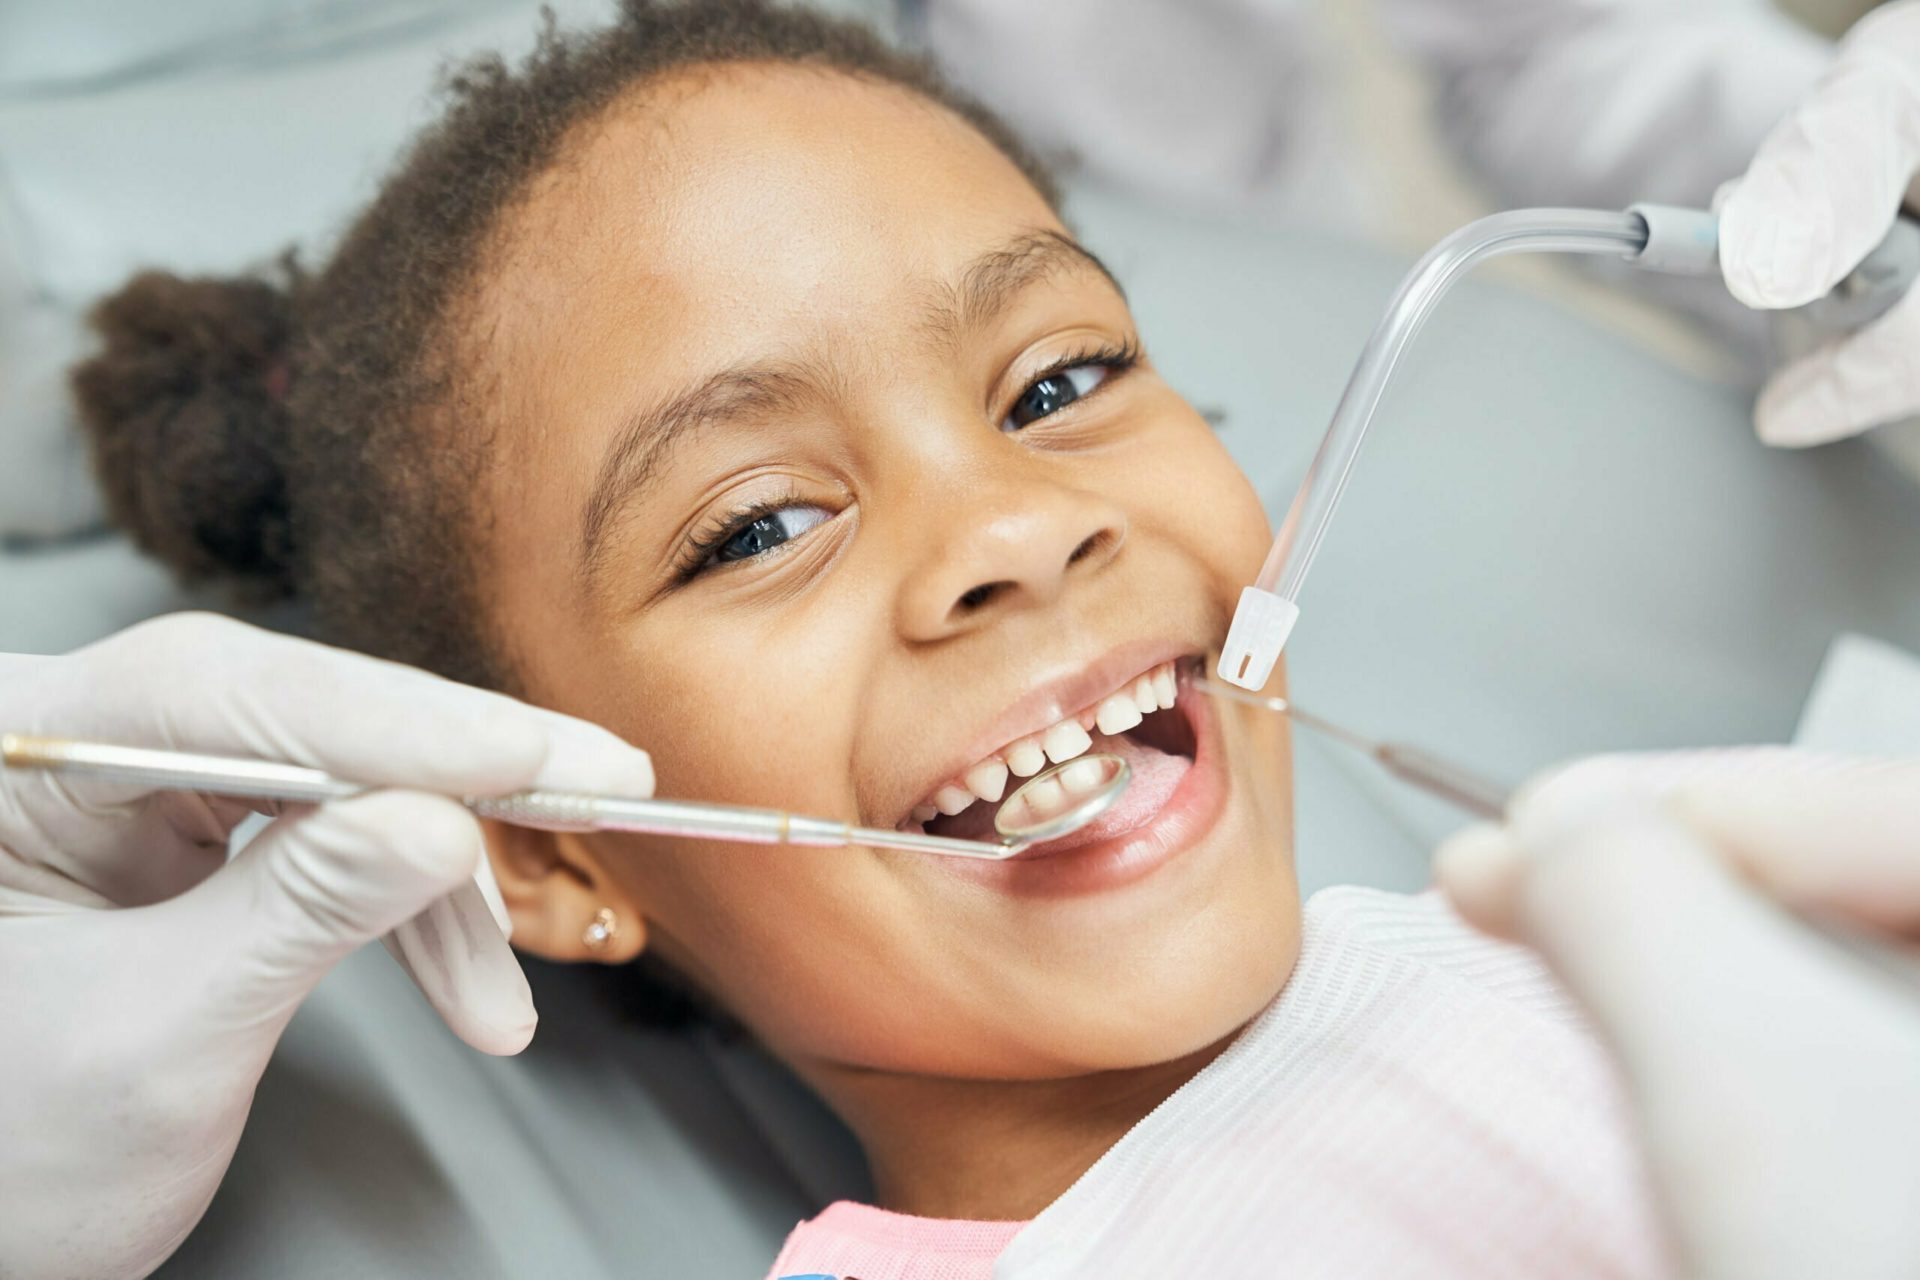 Young girl smiling in the dentist chair